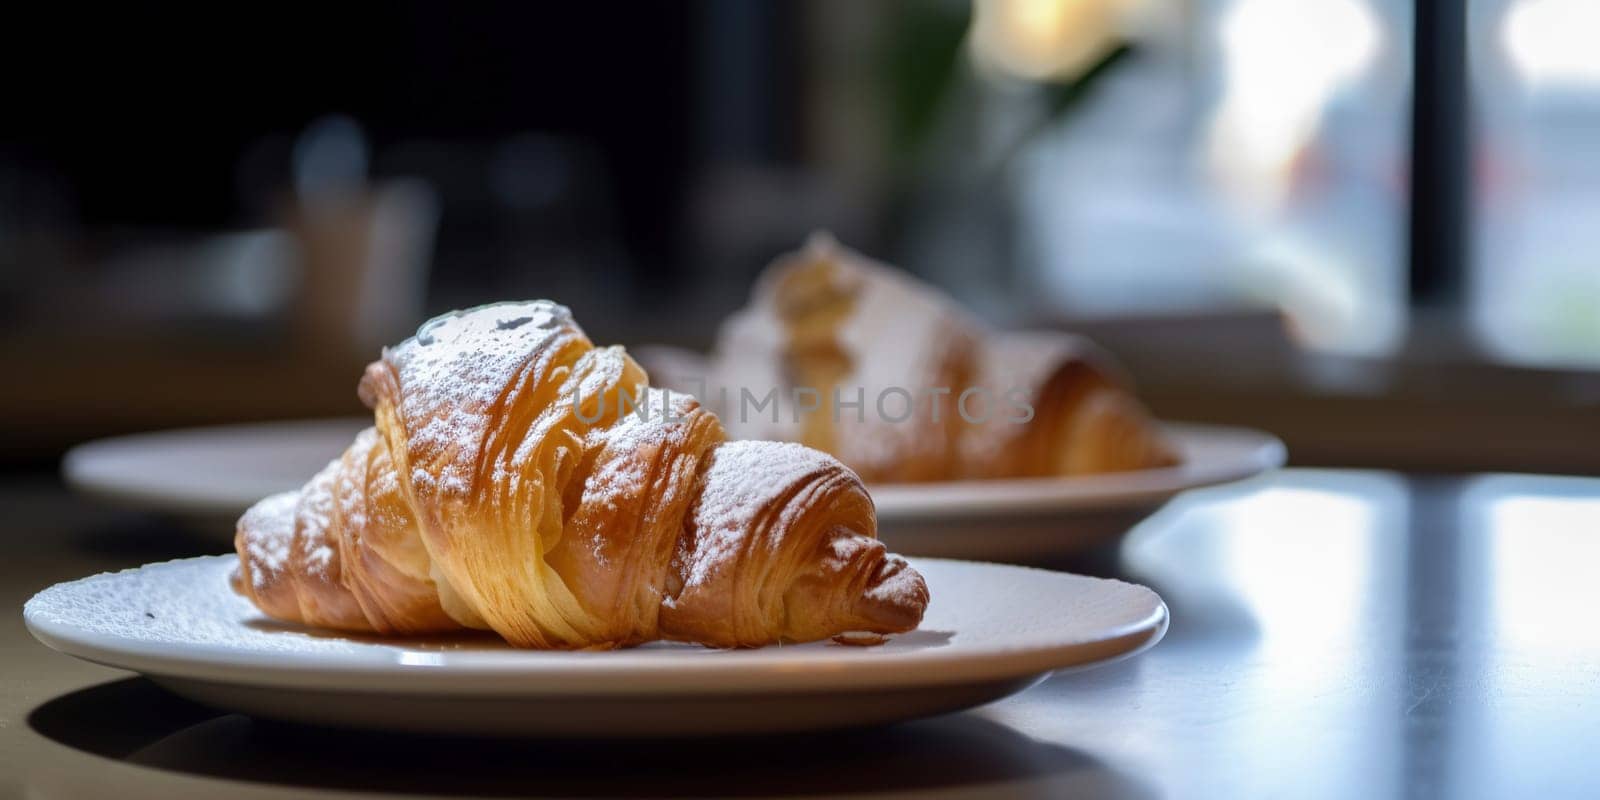 Powdered croissants on plates on the kitchen table with blurred background